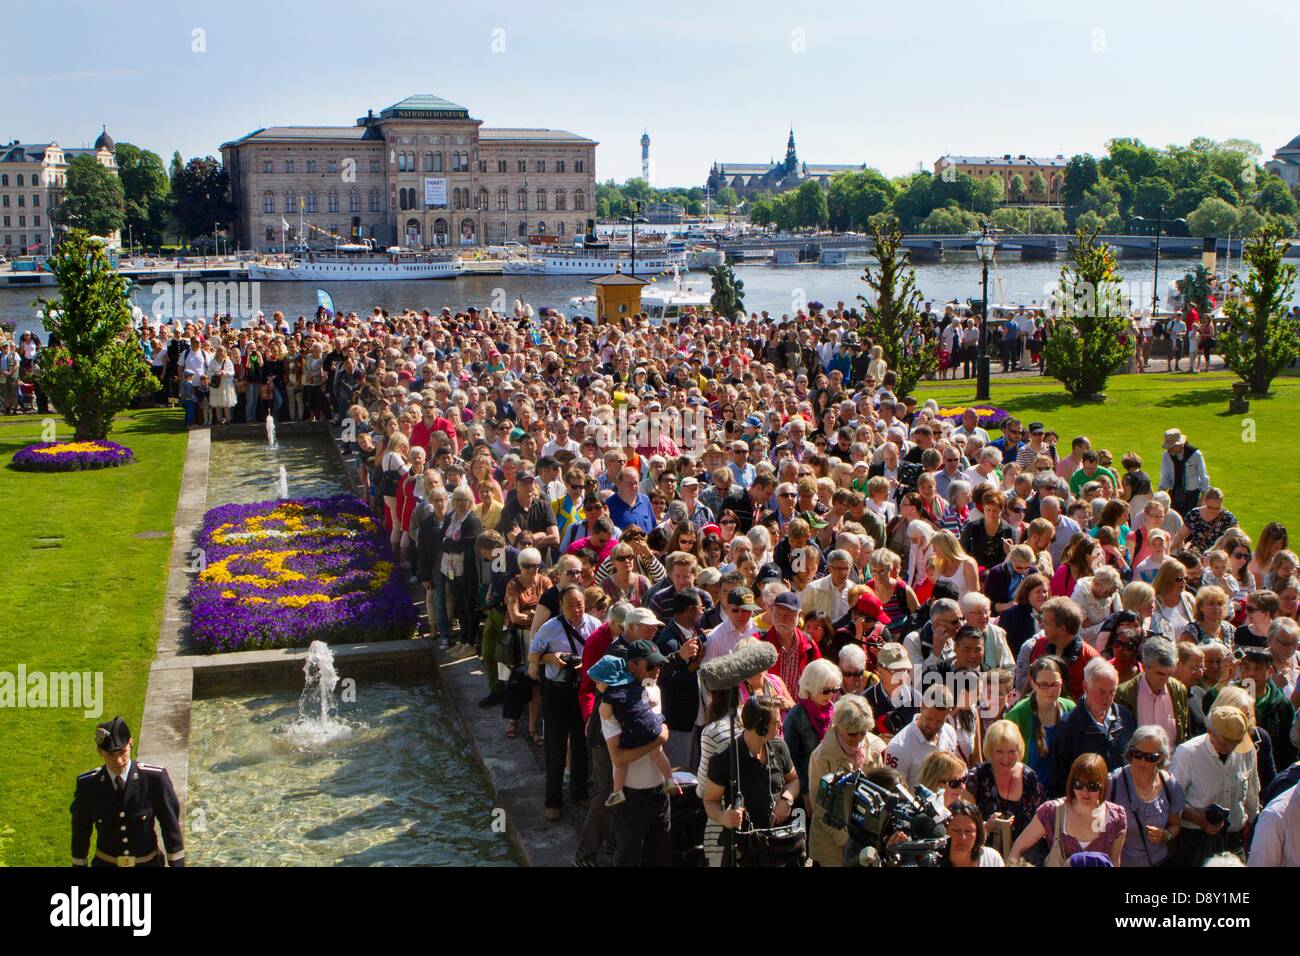 Stockholm, Sweden. 6th June 2013. Visitors waiting for the openinf of the exhibition 'Open Palace' at the Royal Palace during the celebration of the National Day in Stockholm, Sweden 6 June 2013. Photo: Patrick van Katwijk /dpa/Alamy Live News Stock Photo